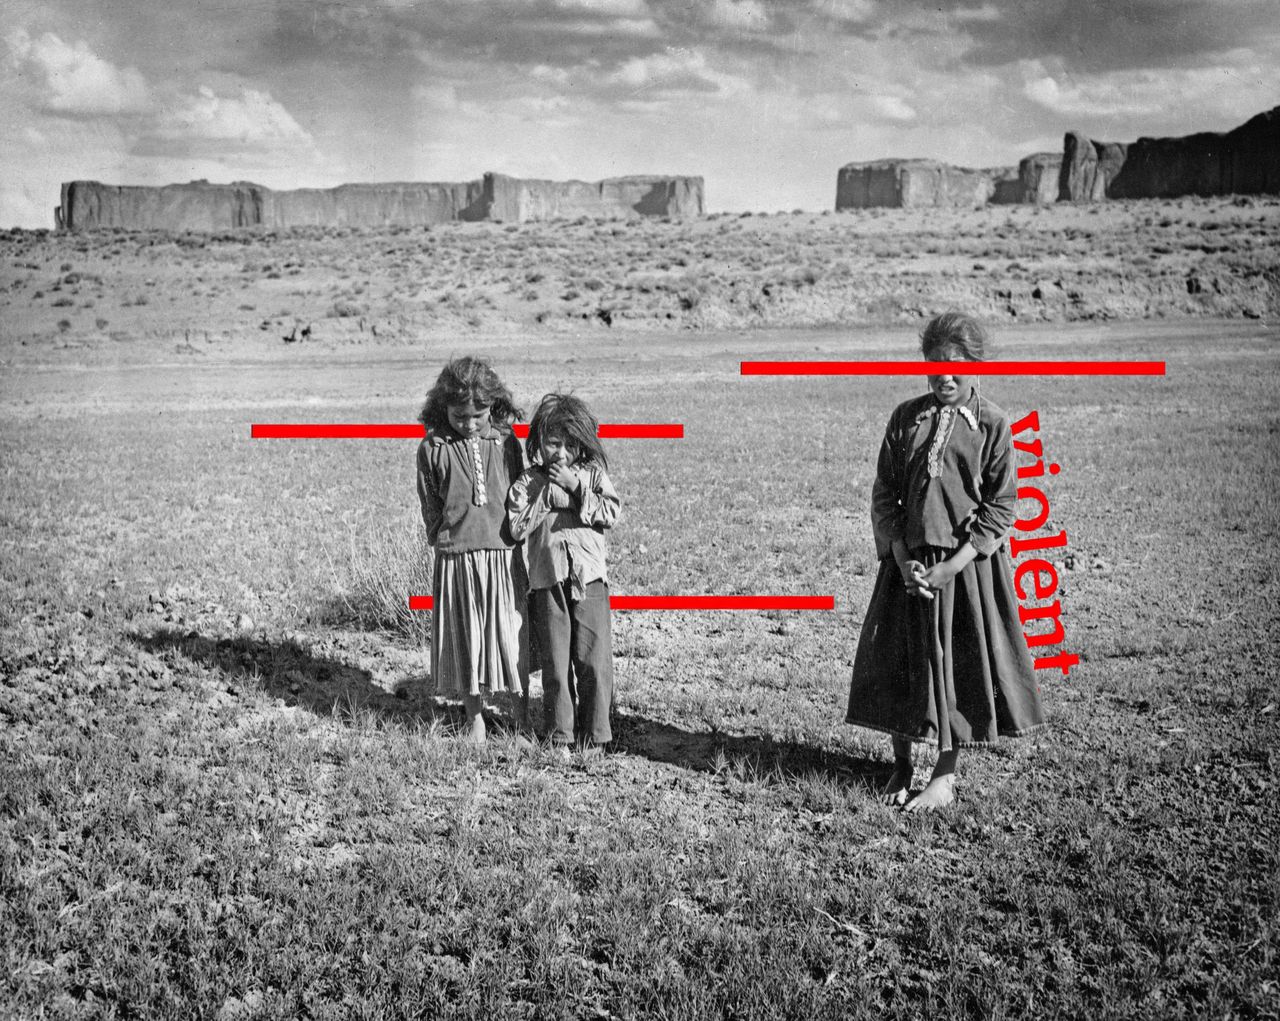 Three Navajo children, dressed in traditional clothing, stand barefoot in the grass against the rugged landscape of an unspecified Navajo reservation, United States, circa 1935.